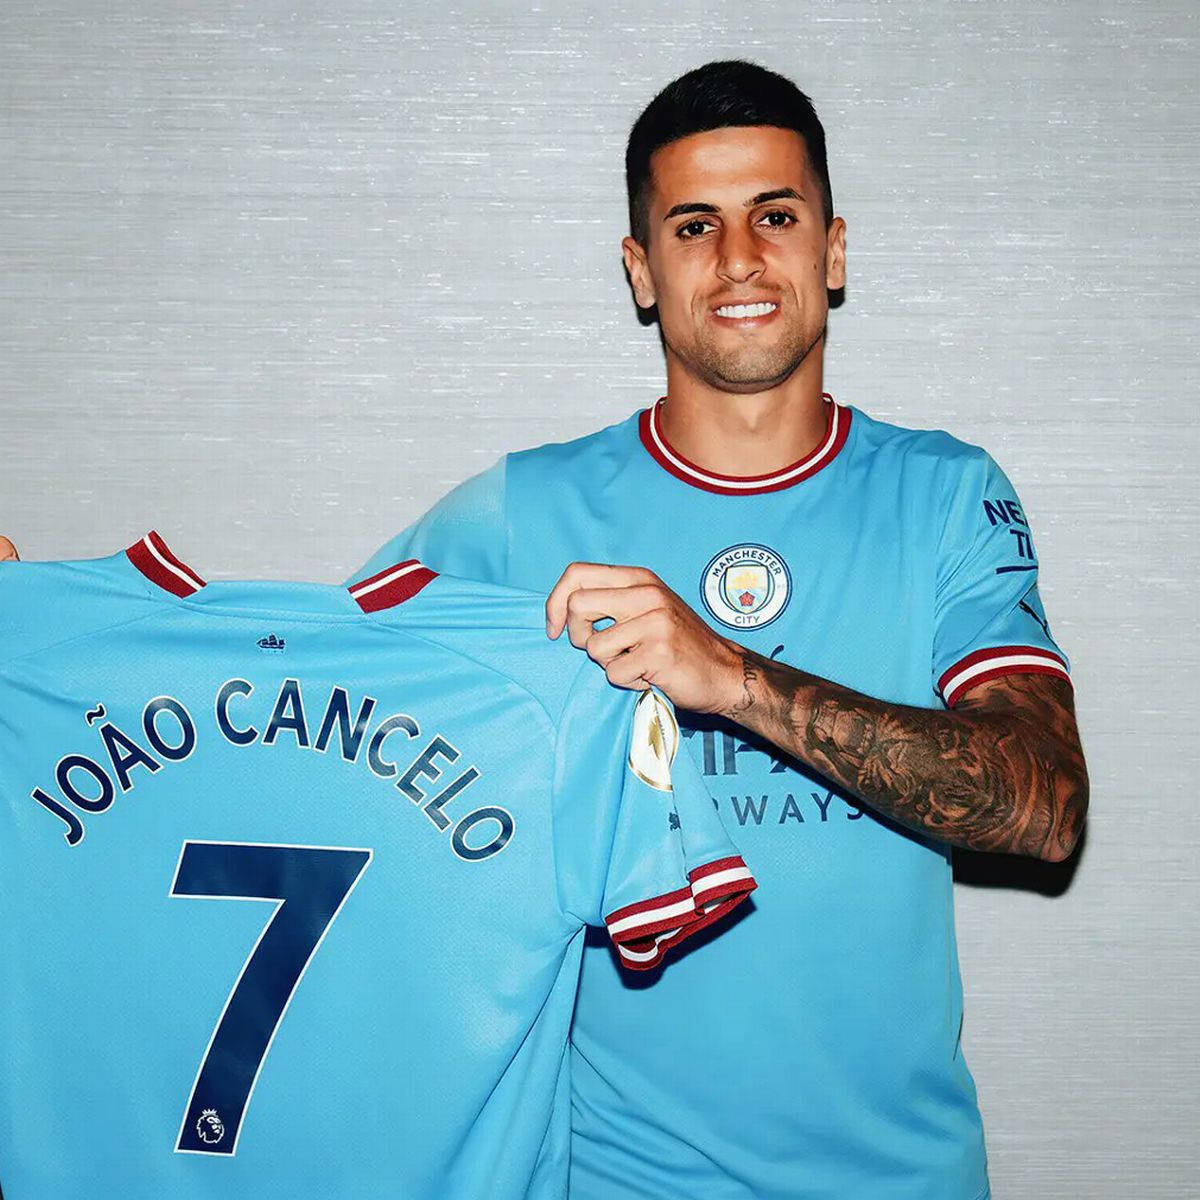 Joao Cancelo With Jersey Shirt Background